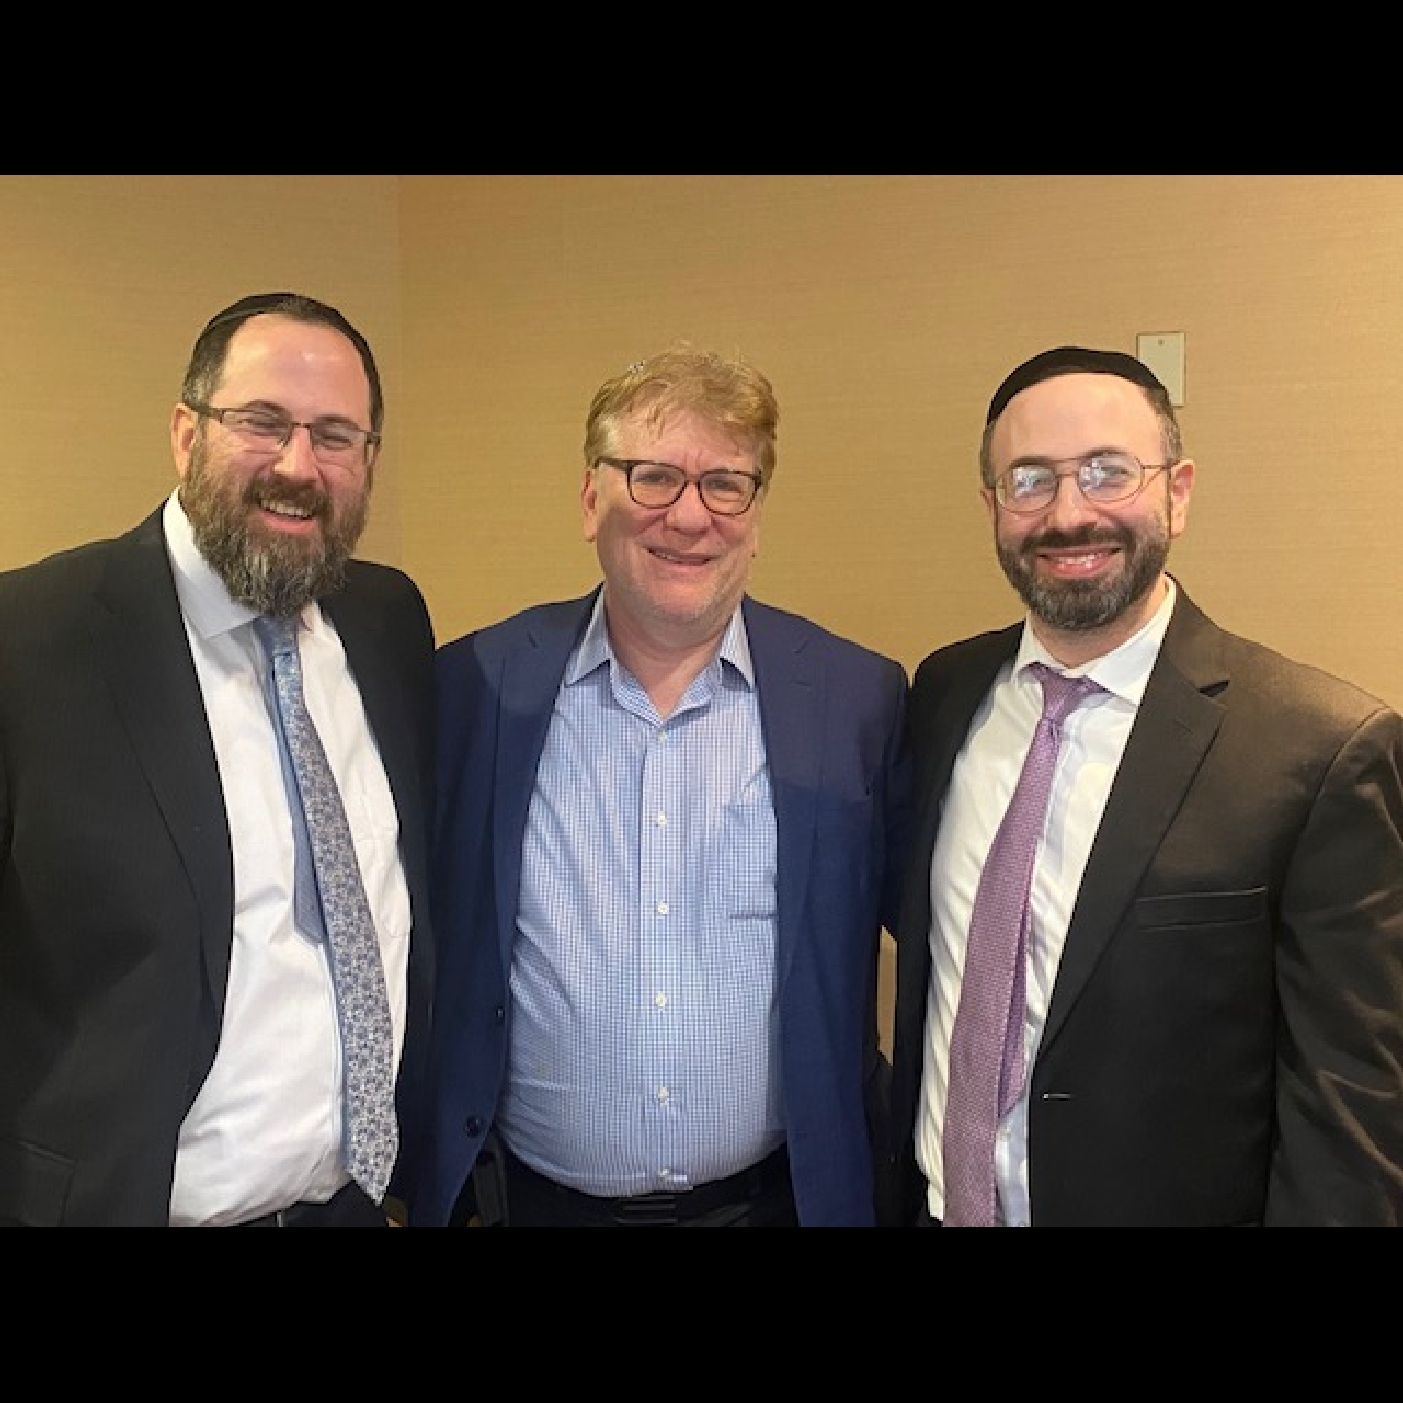 Talkline with Zev Brenner with Rabbis Yitzchok & Moshe Fingerer on Helping Jews get back to their Jewish roots